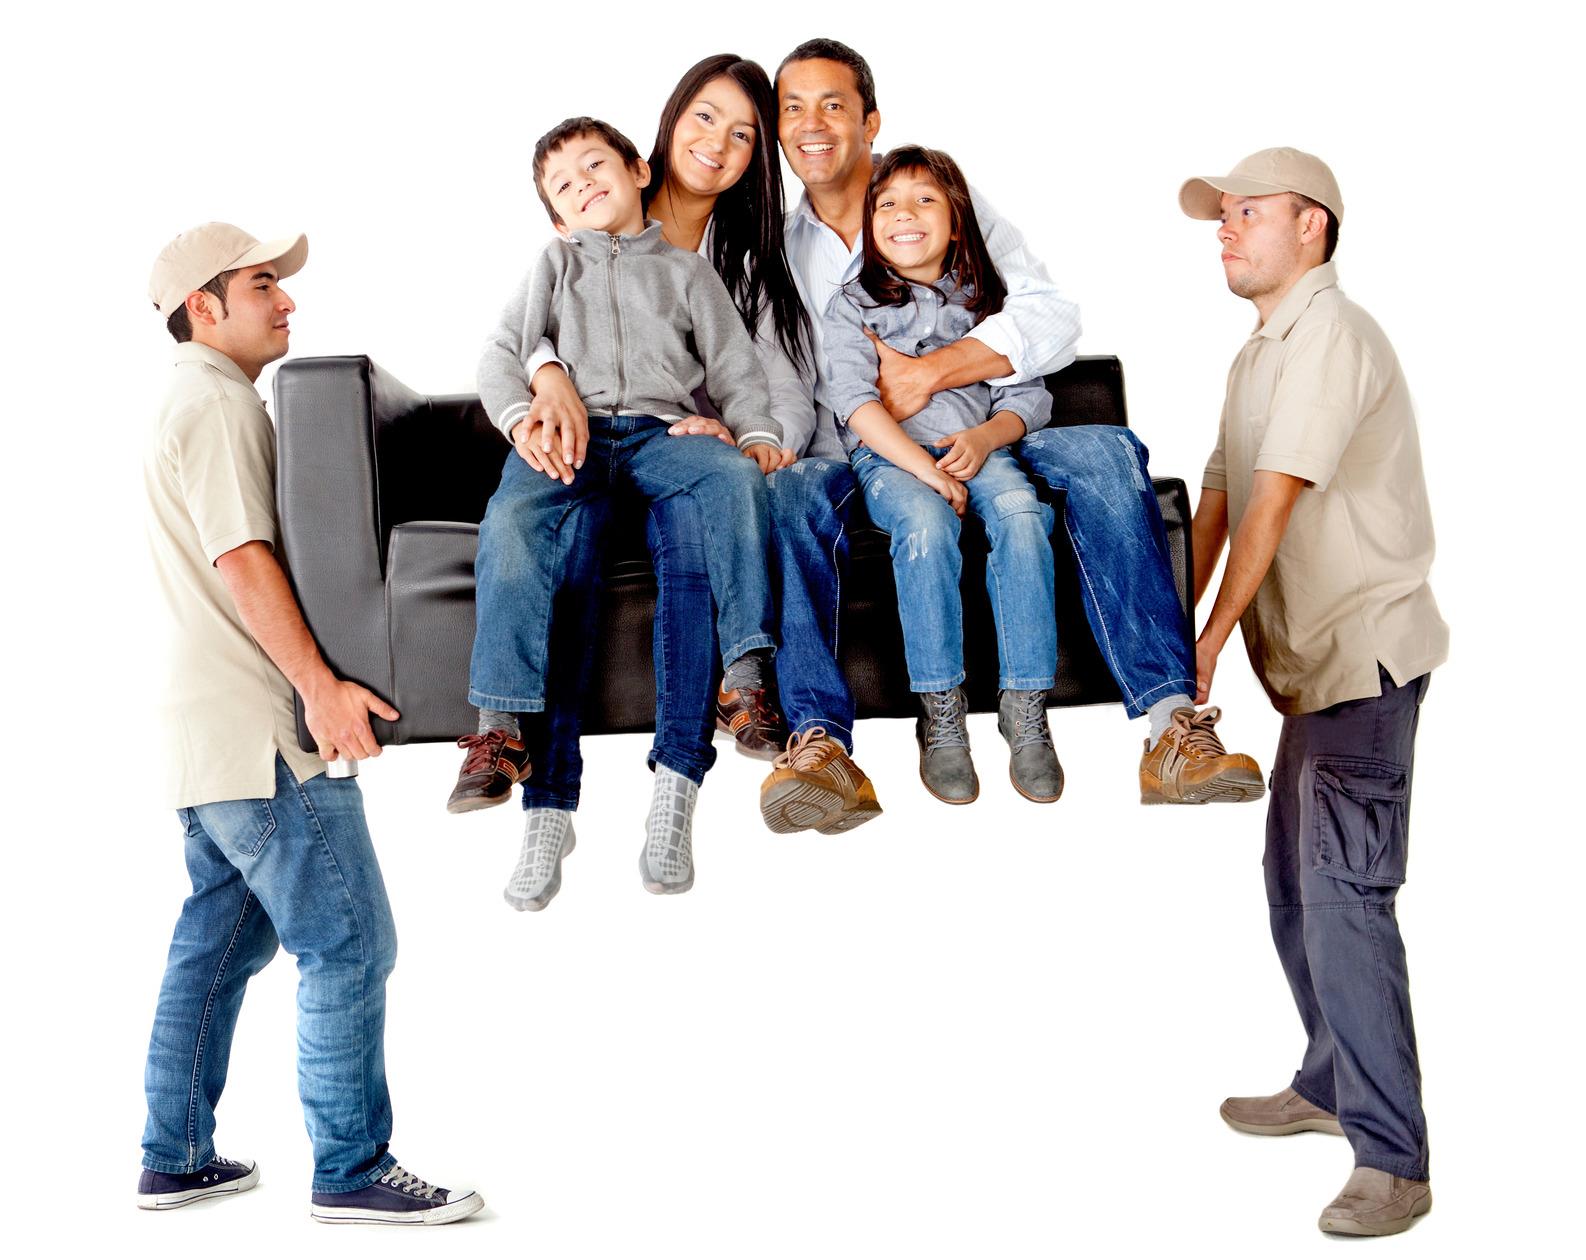 Men carrying a sofa with a family moving house - isolated over a white background